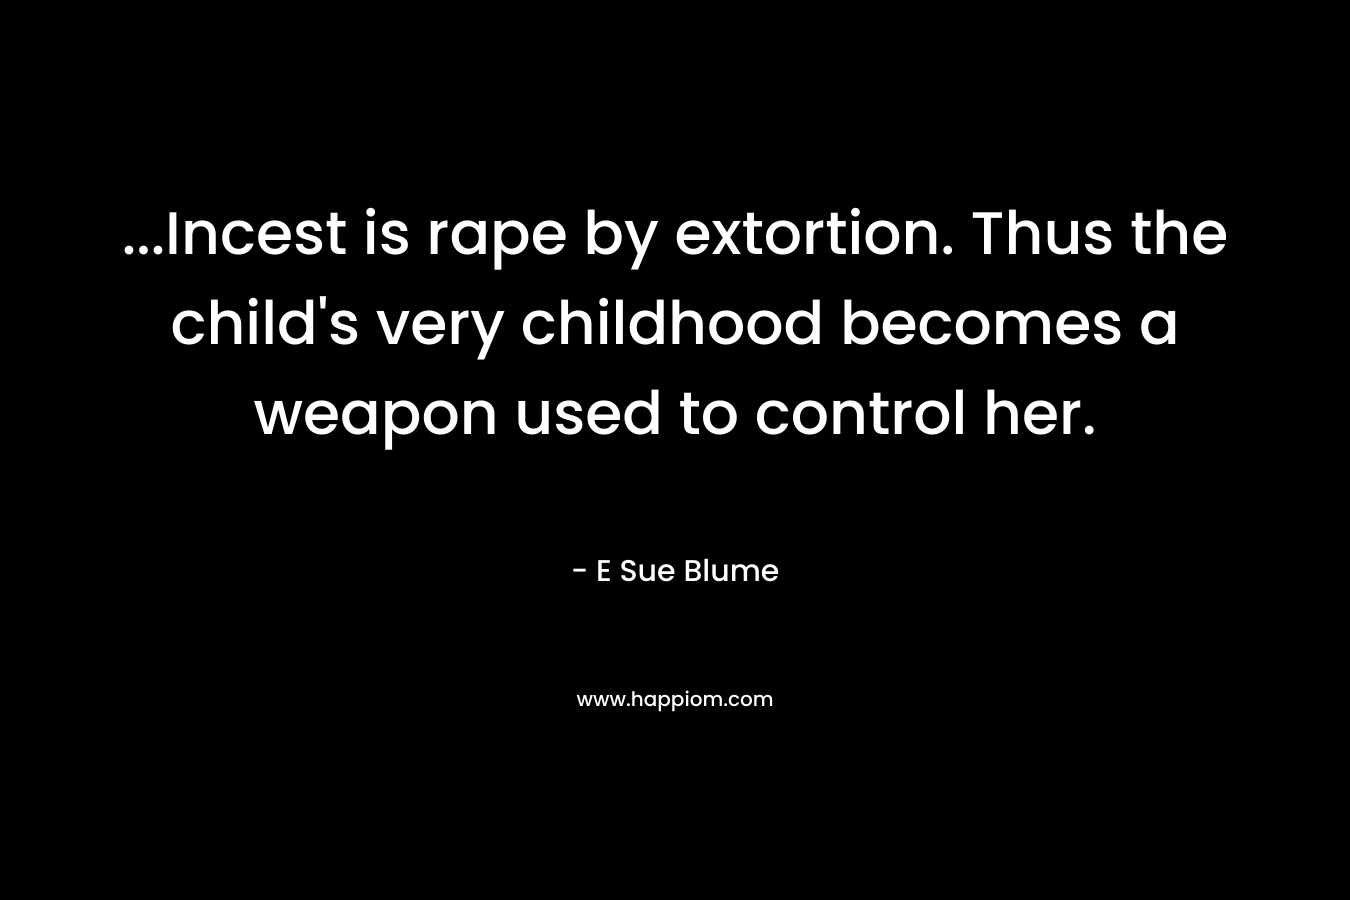 …Incest is rape by extortion. Thus the child’s very childhood becomes a weapon used to control her. – E Sue Blume